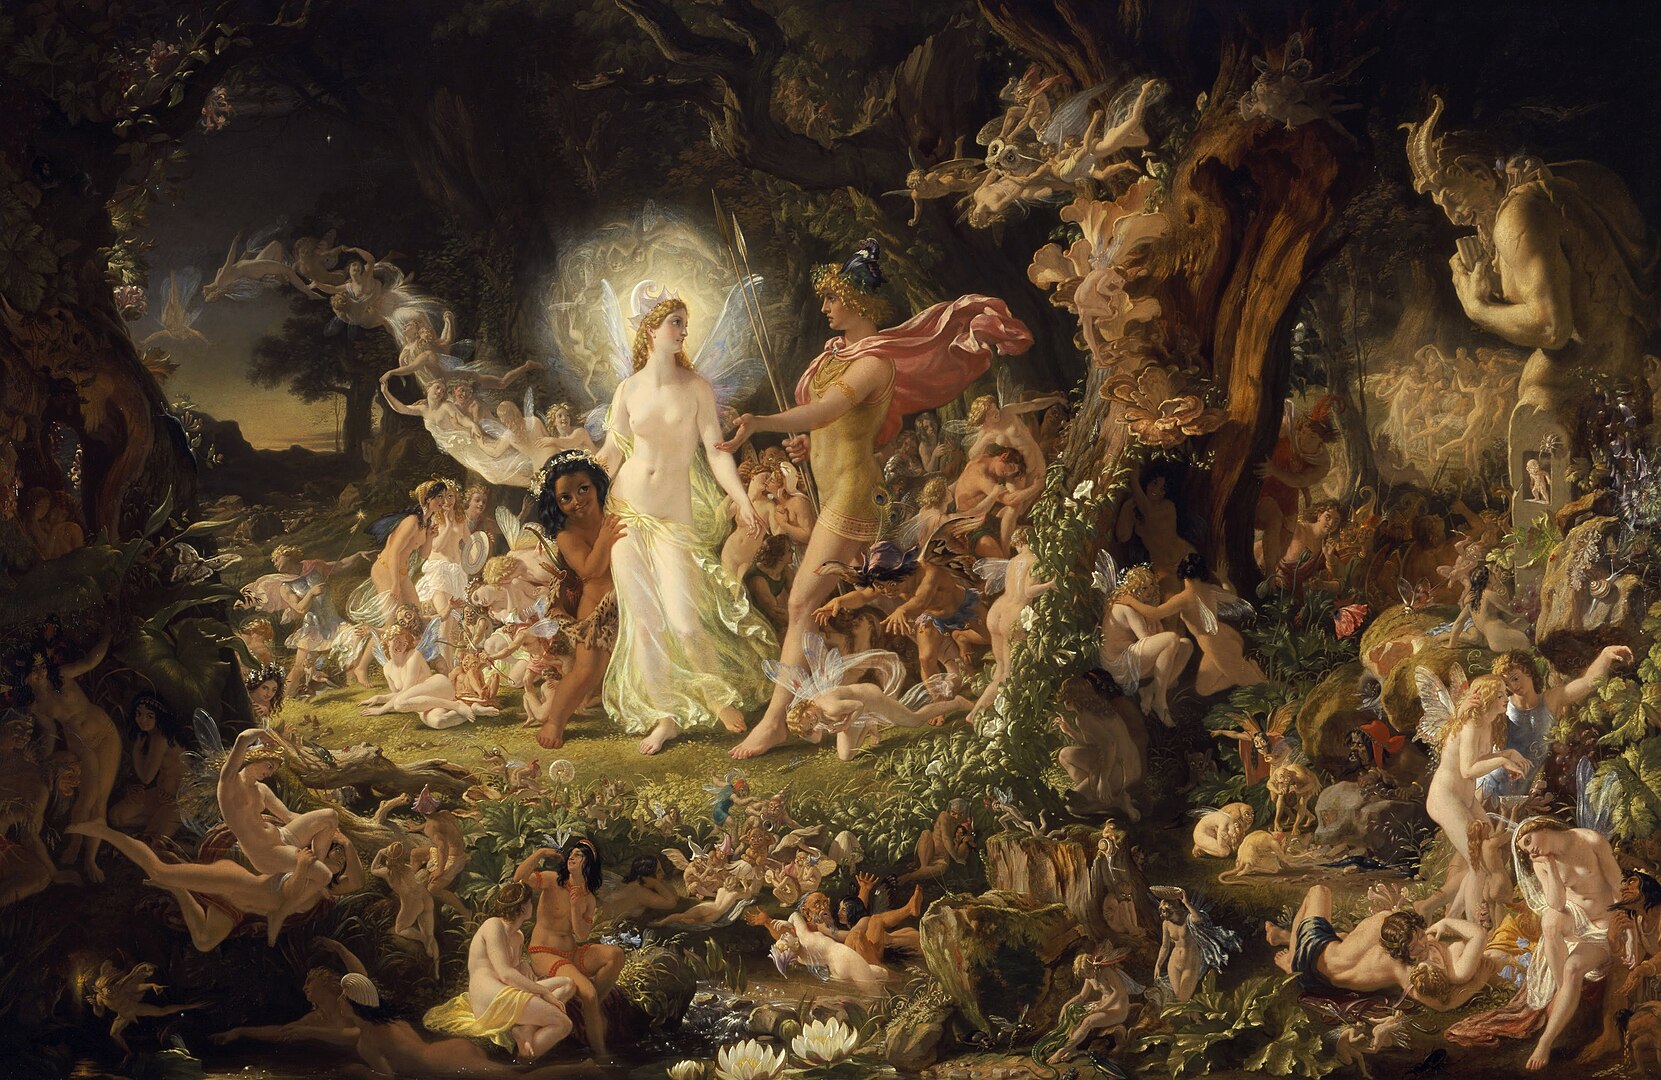 A forest scene depicts a large group of creatures who surround a lit up fairy.